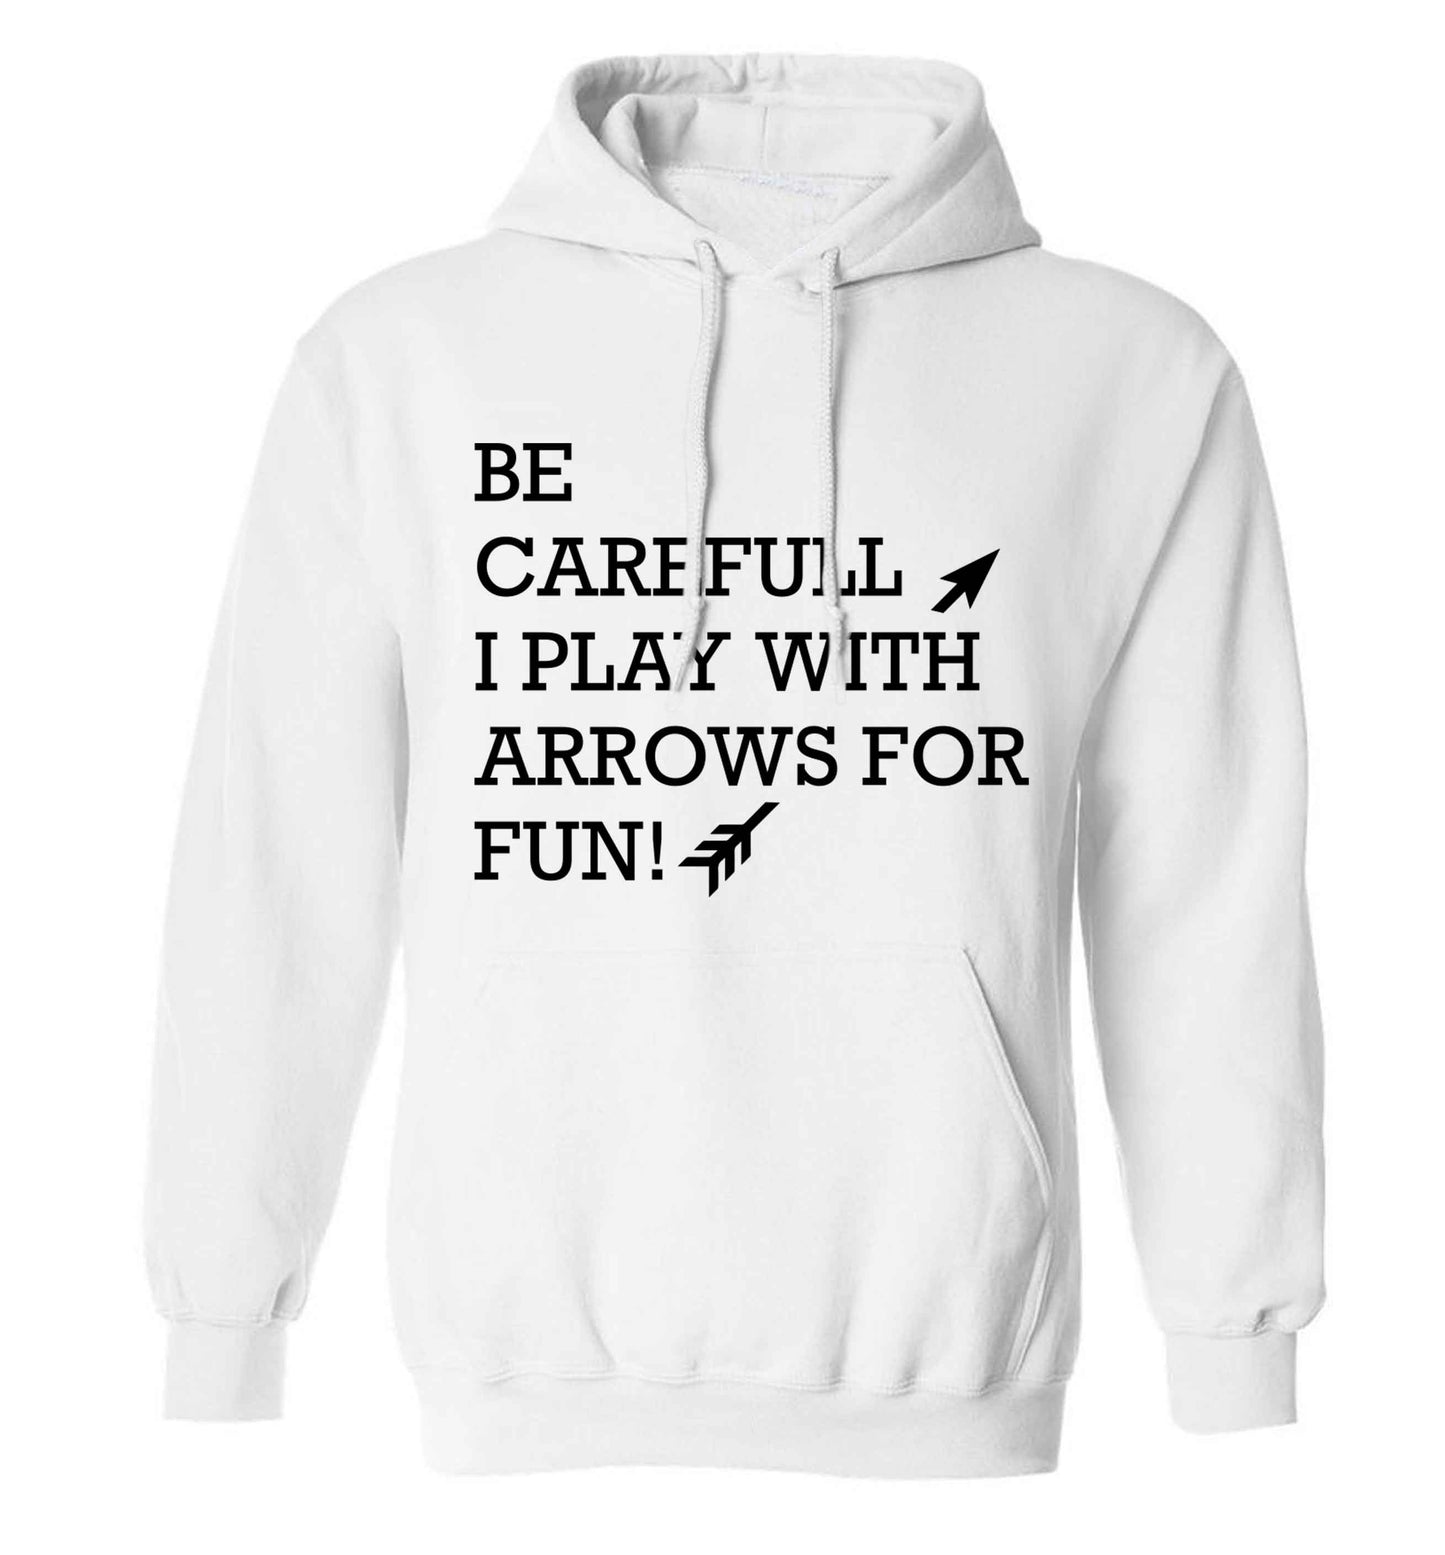 Be carefull I play with arrows for fun adults unisex white hoodie 2XL